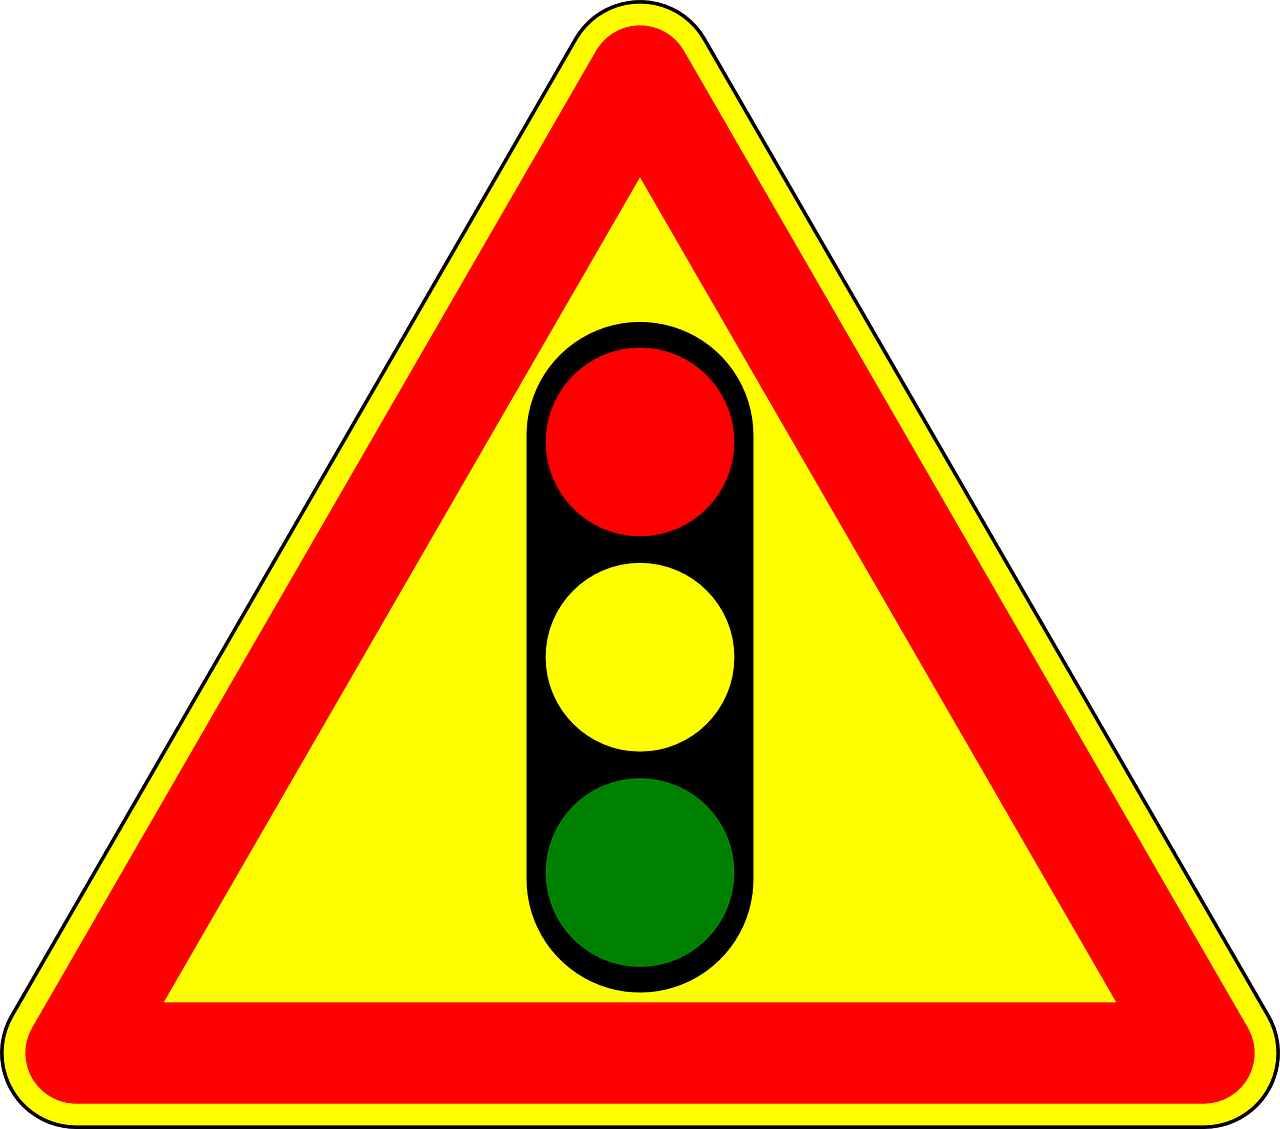 traffic lights attention sign free photo